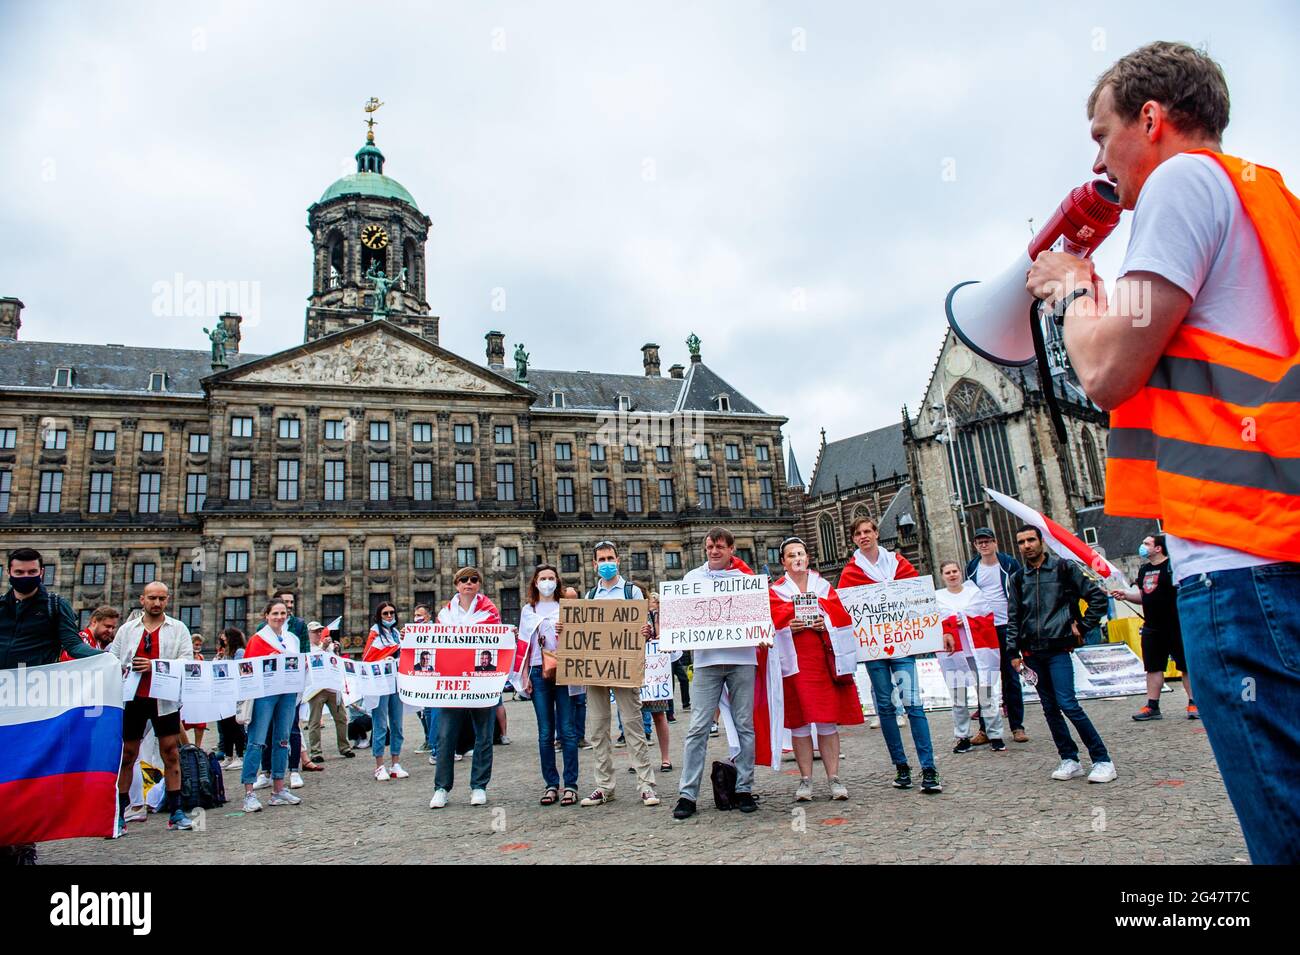 Amsterdam, Netherlands. 19th June, 2021. A Belarusian protester seen giving  a speech before the march.The Belarusian community in The Netherlands  organized a protest to show their support to all political prisoners and